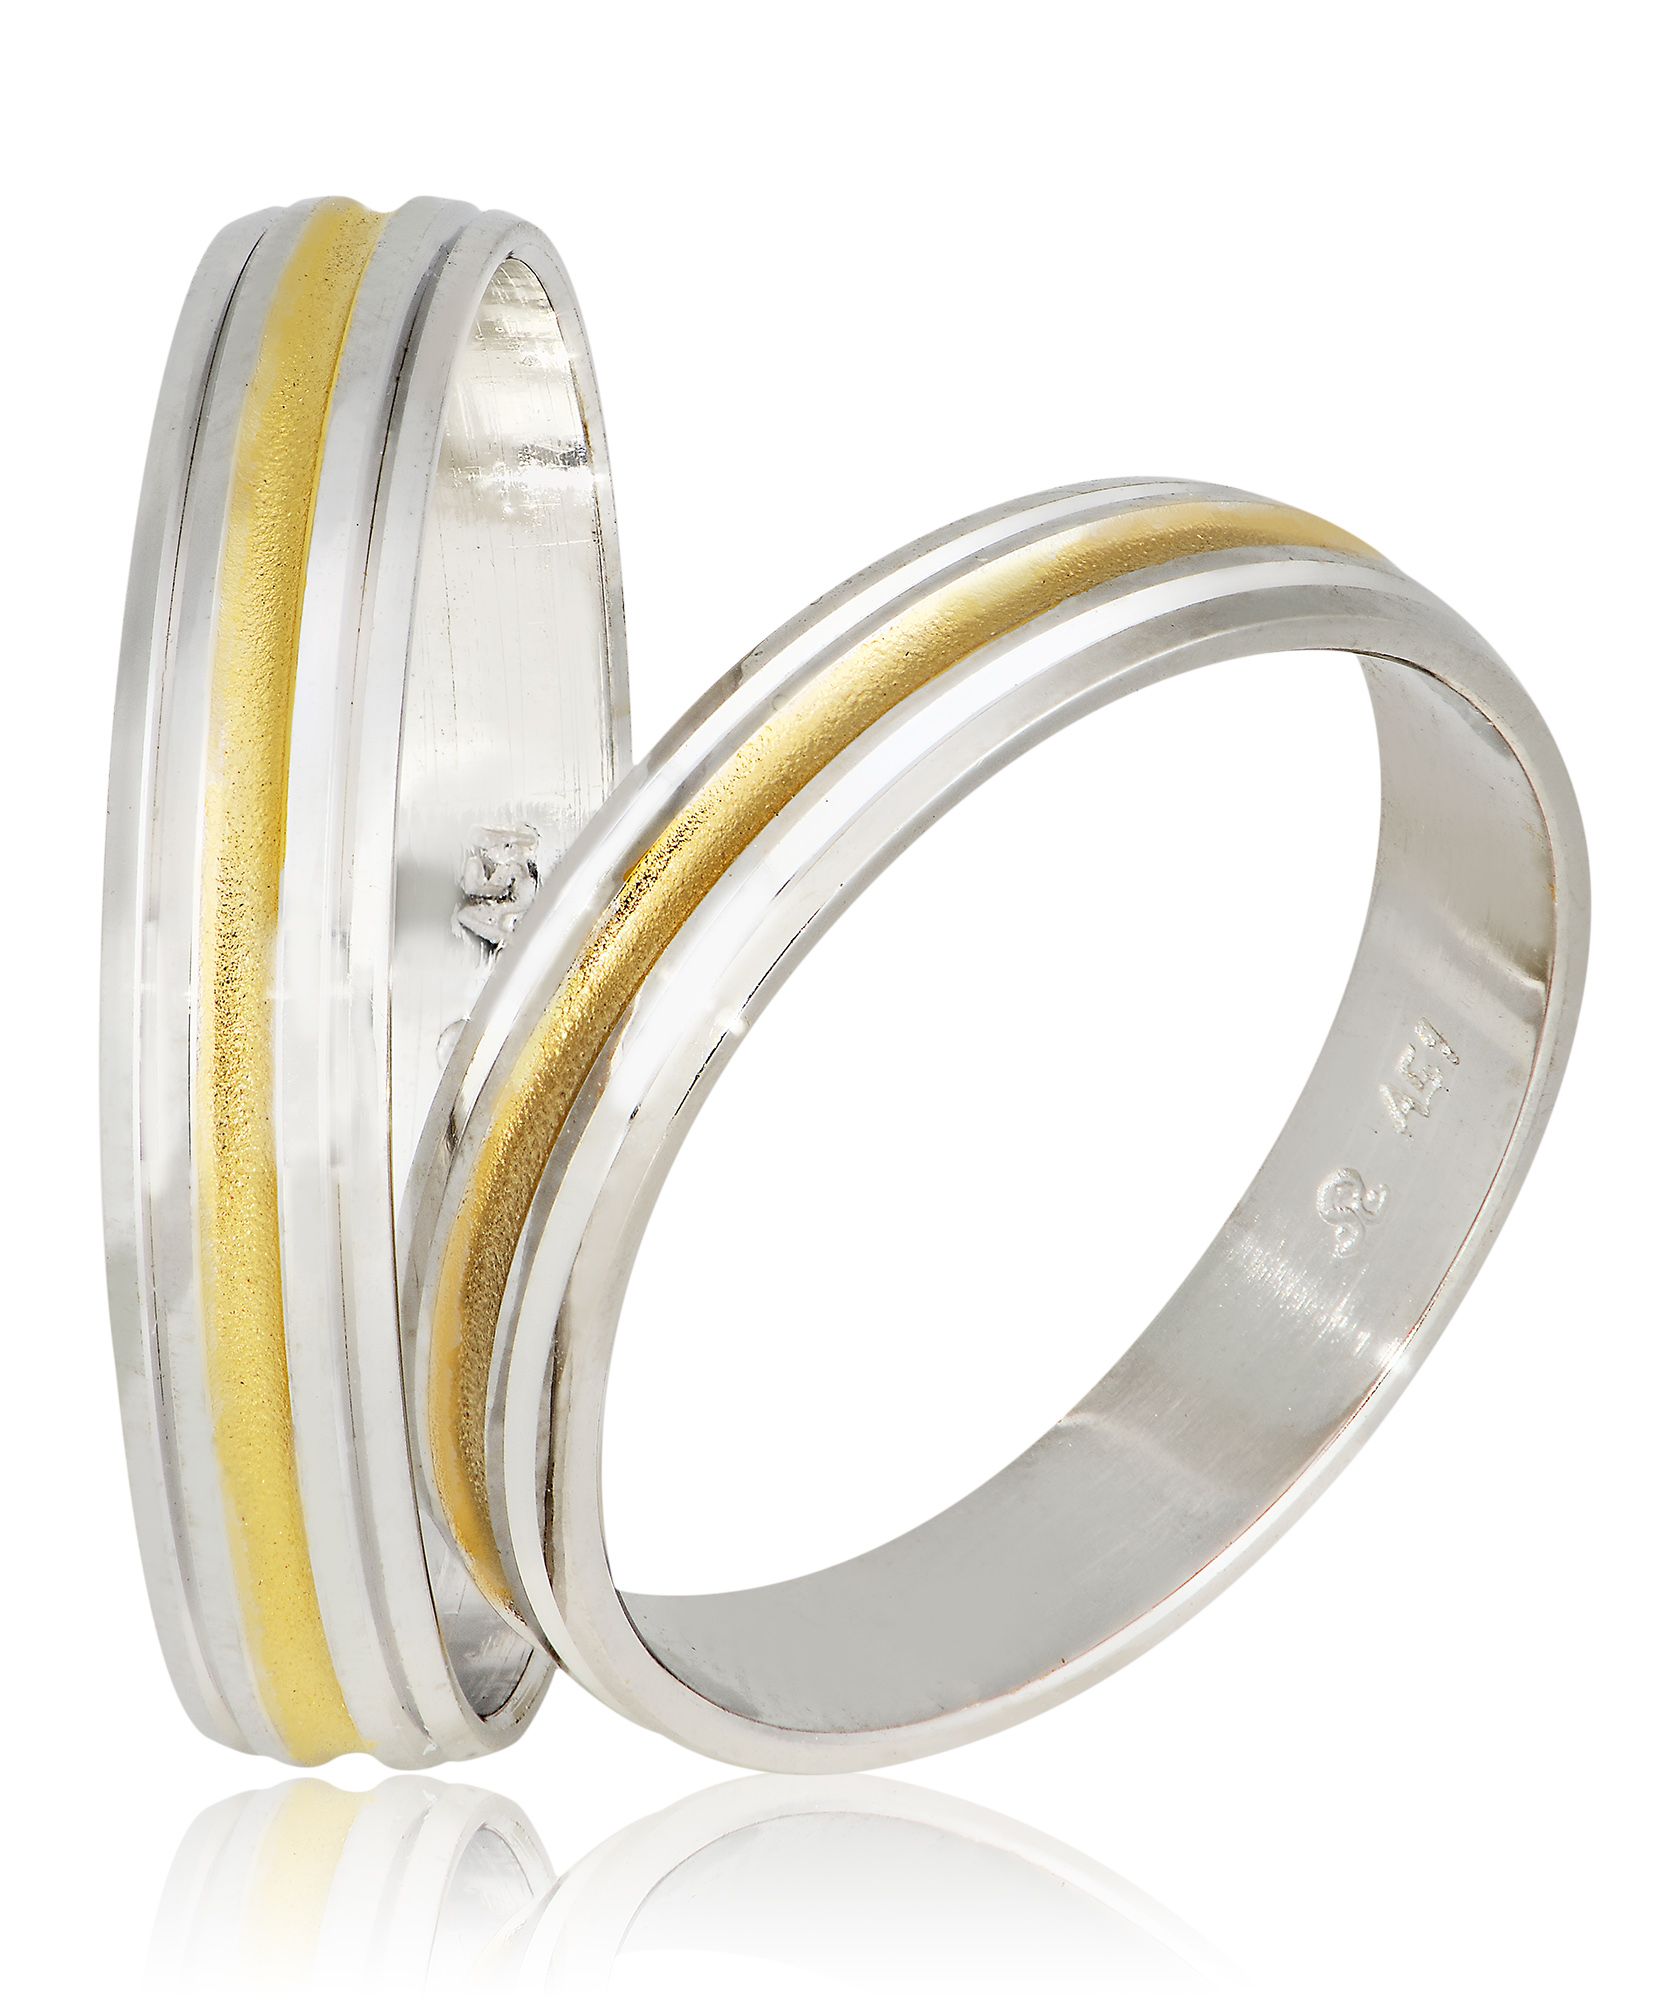 White gold & gold wedding rings 4mm (code Sxx3)